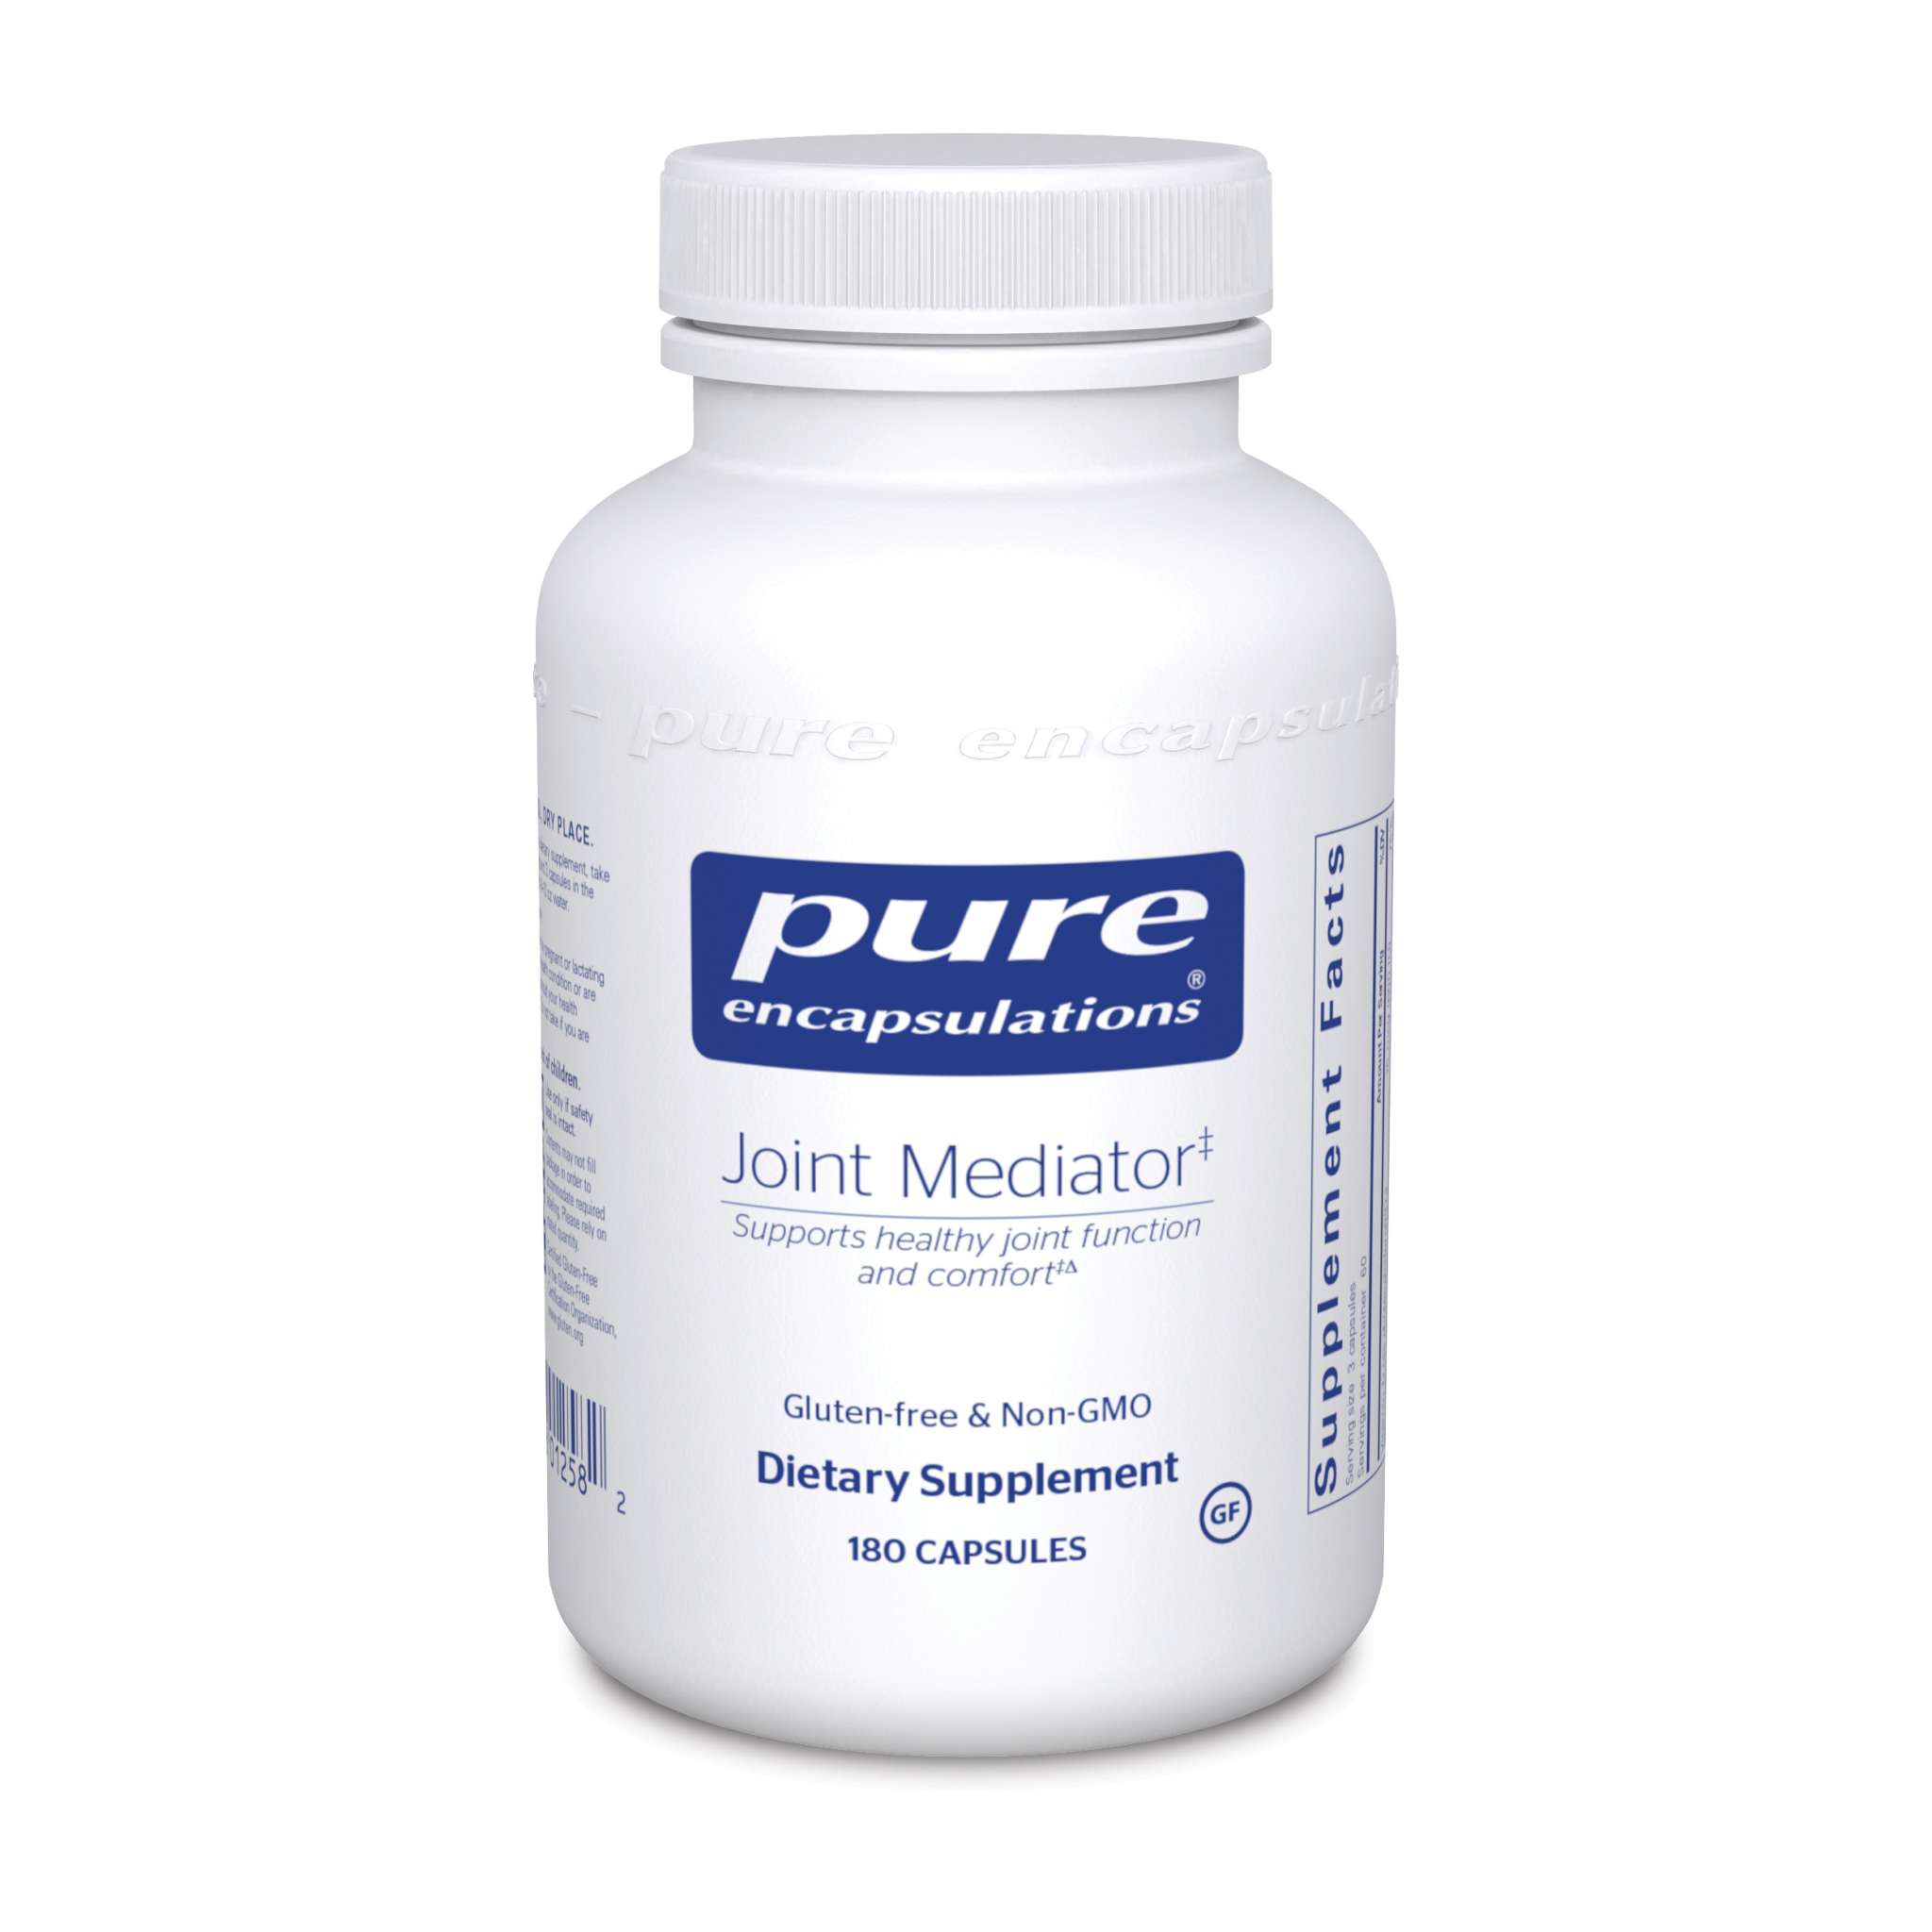 Pure Encapsulations - Joint Mediator